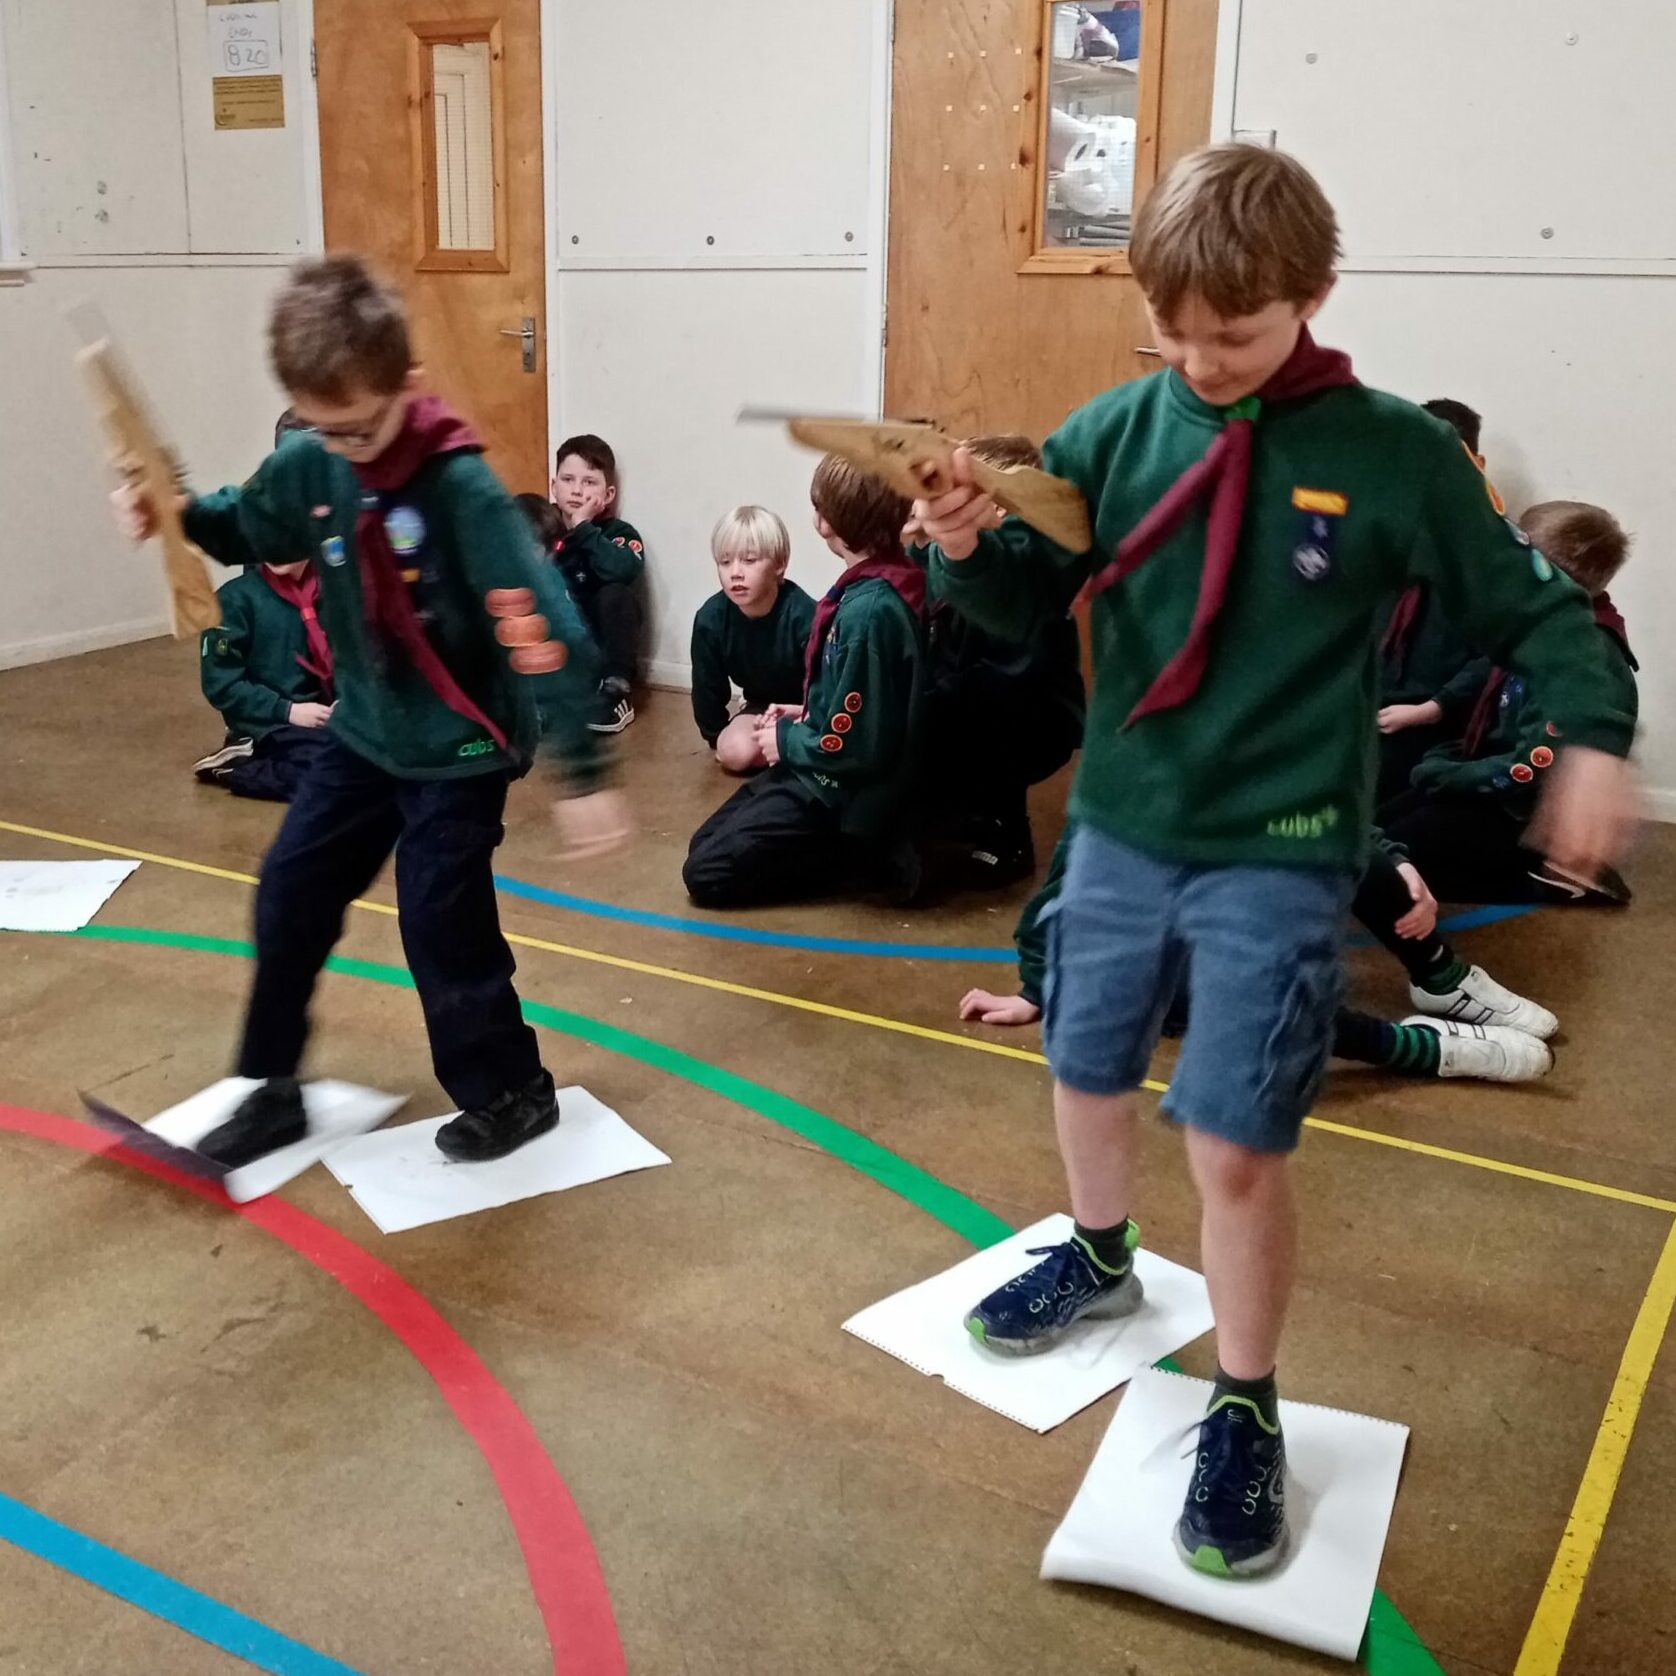 Two Cub Scouts race by sliding their feet on sheets of paper while carrying elastic-band shooters